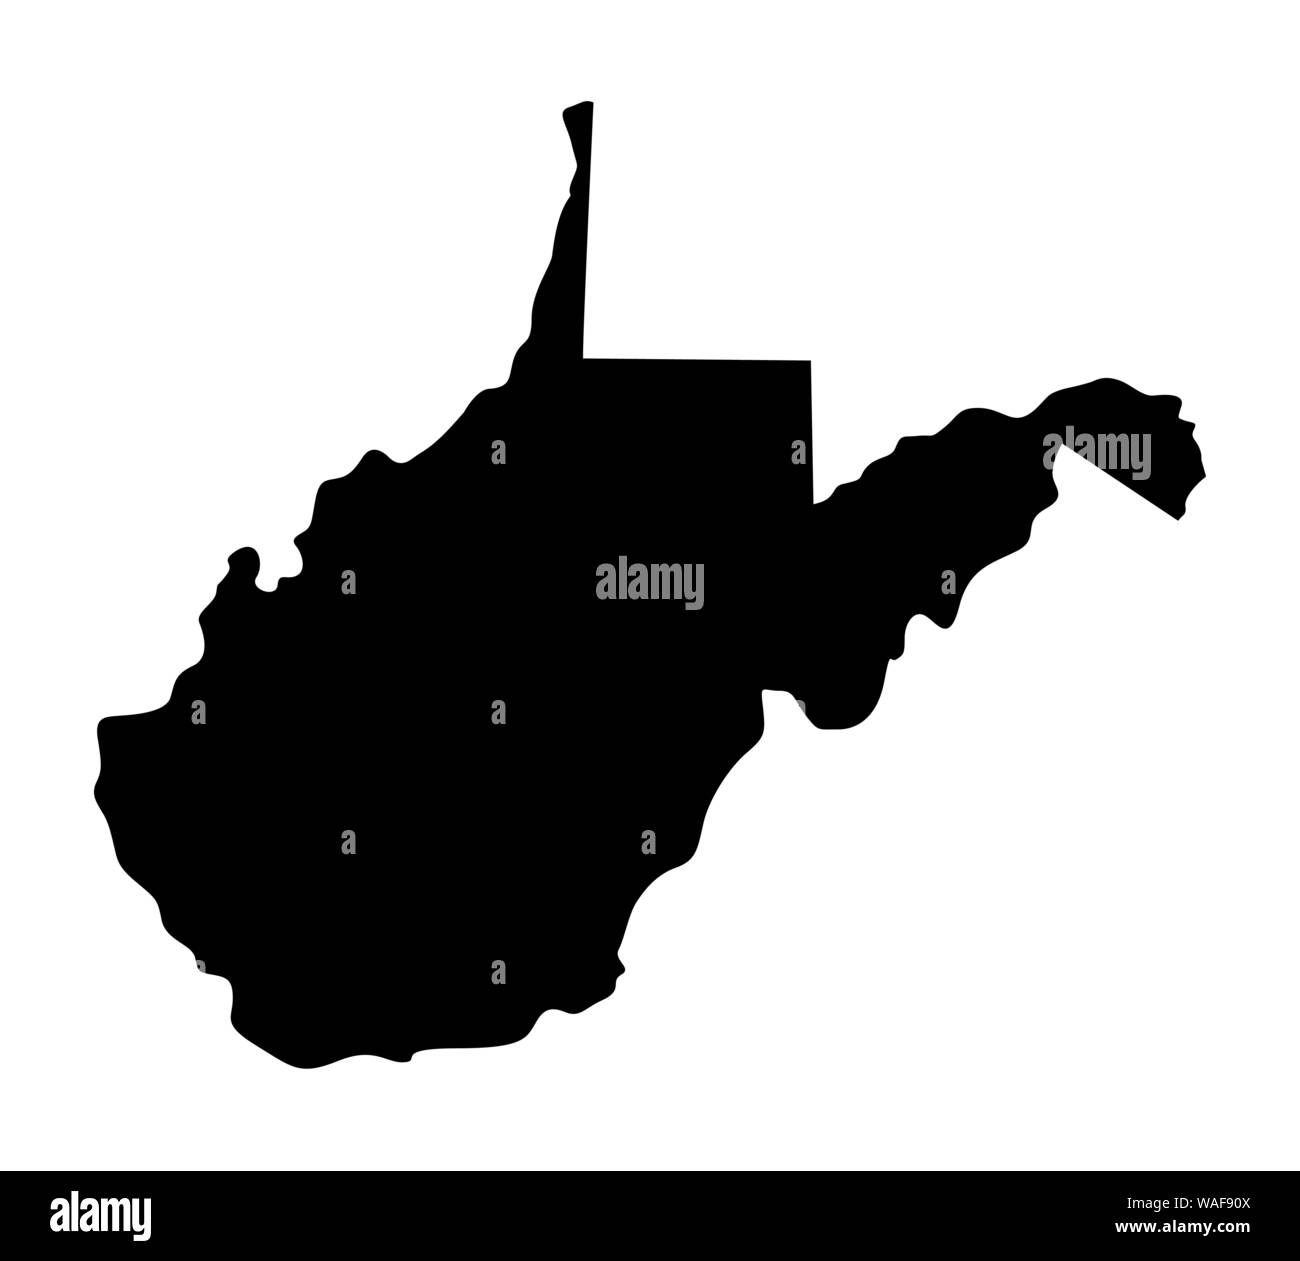 West Virginia dark silhouette map isolated on white background Stock Vector